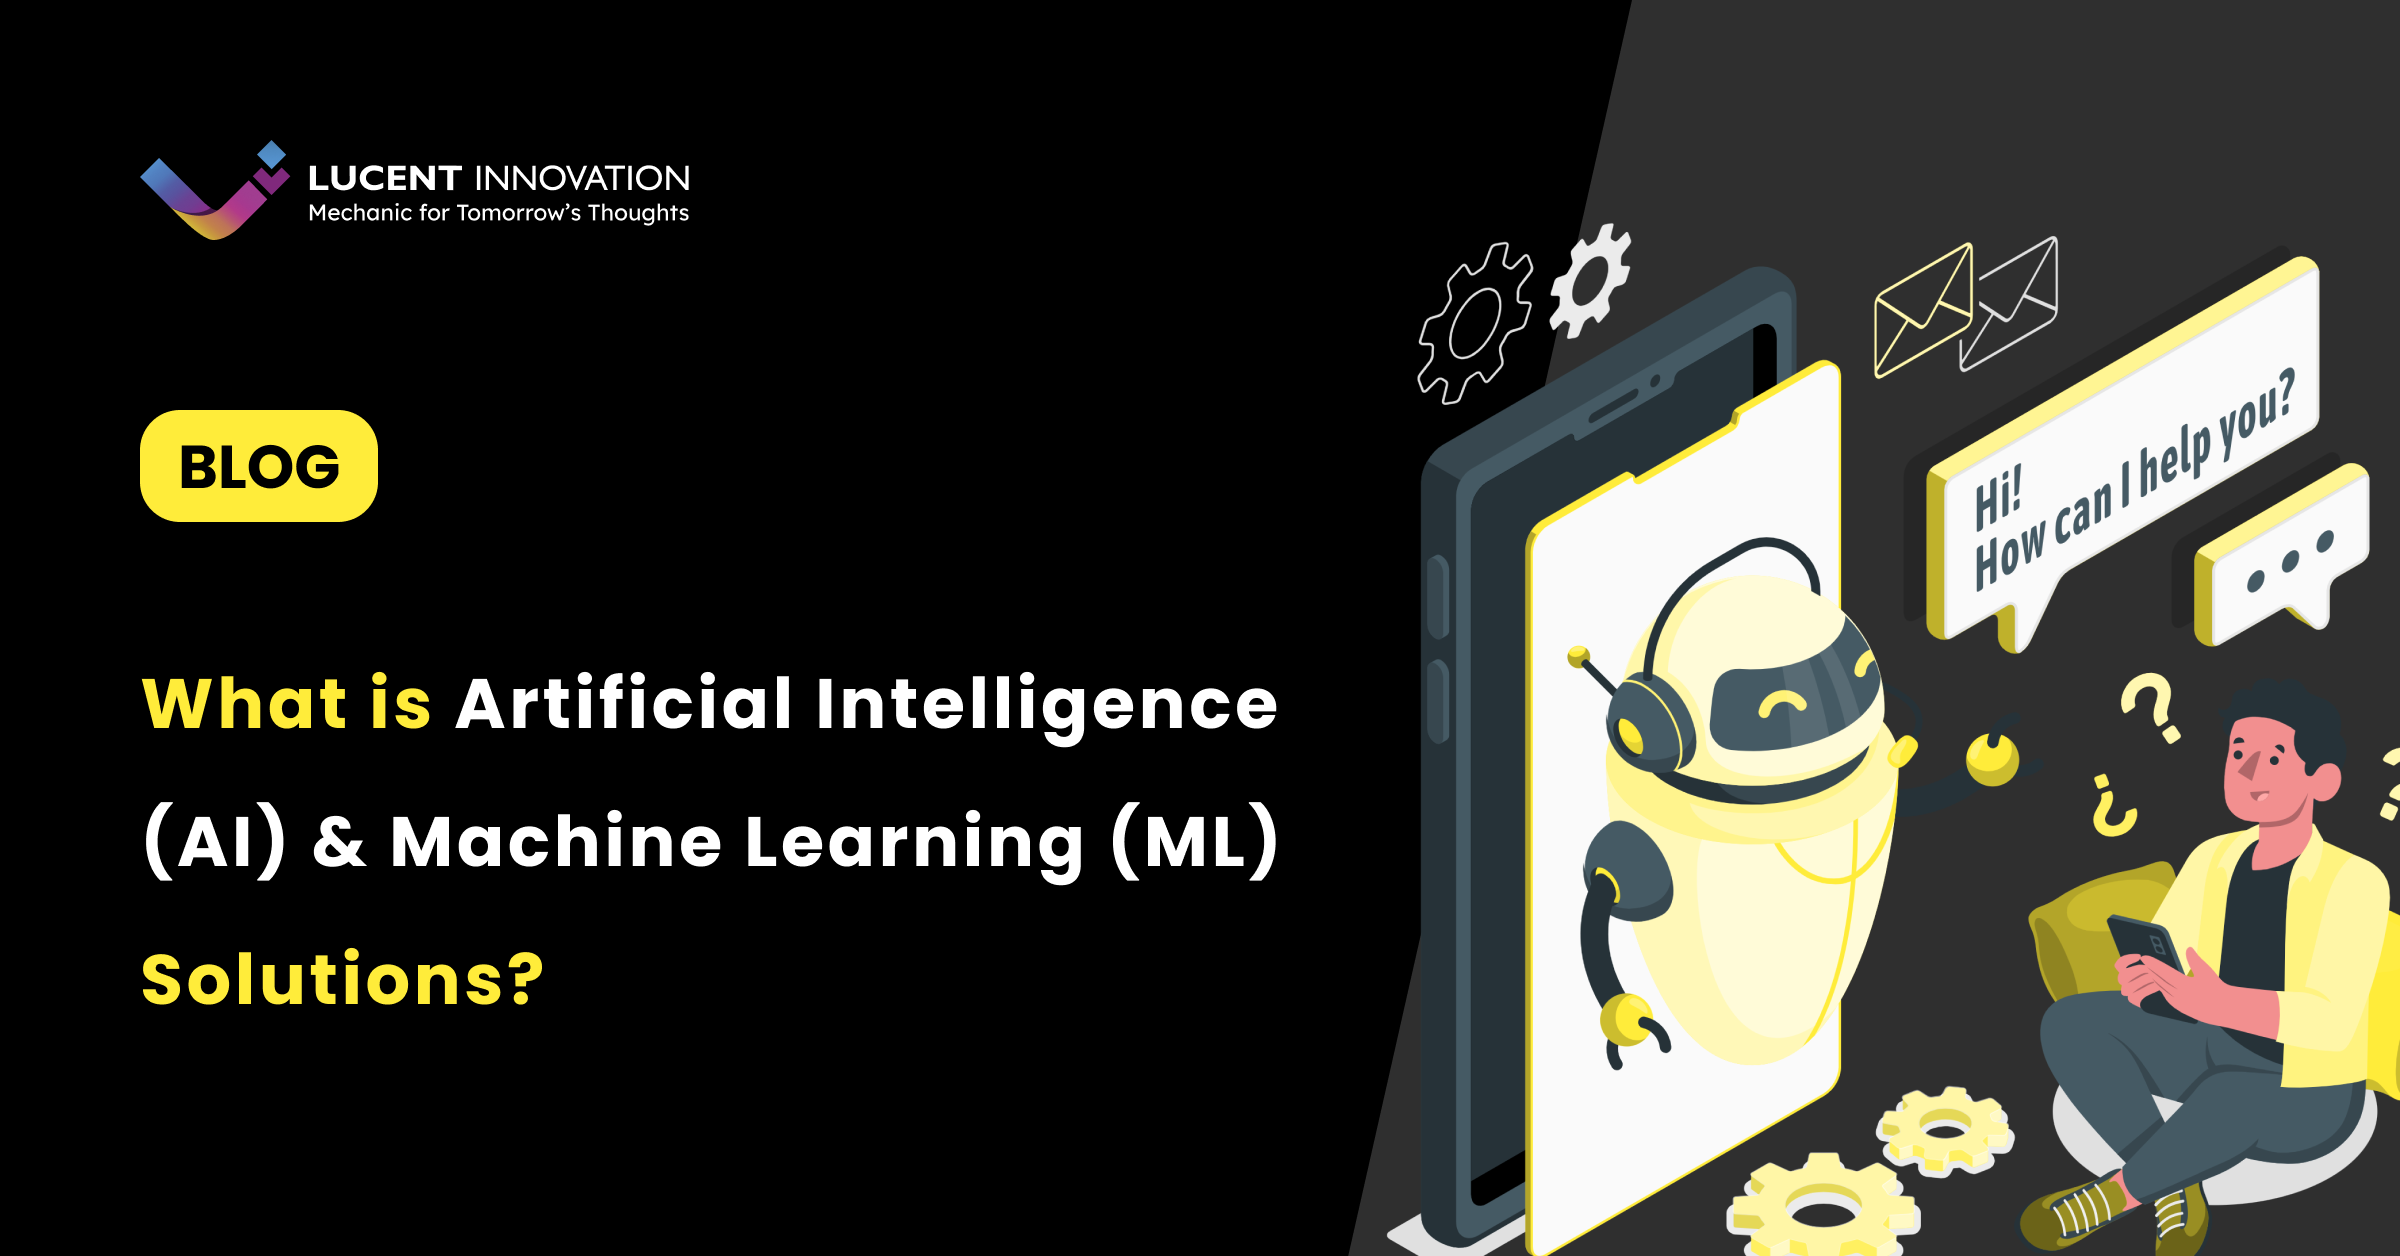 What is Artificial Intelligence (AI) & Machine Learning (ML) Solutions?